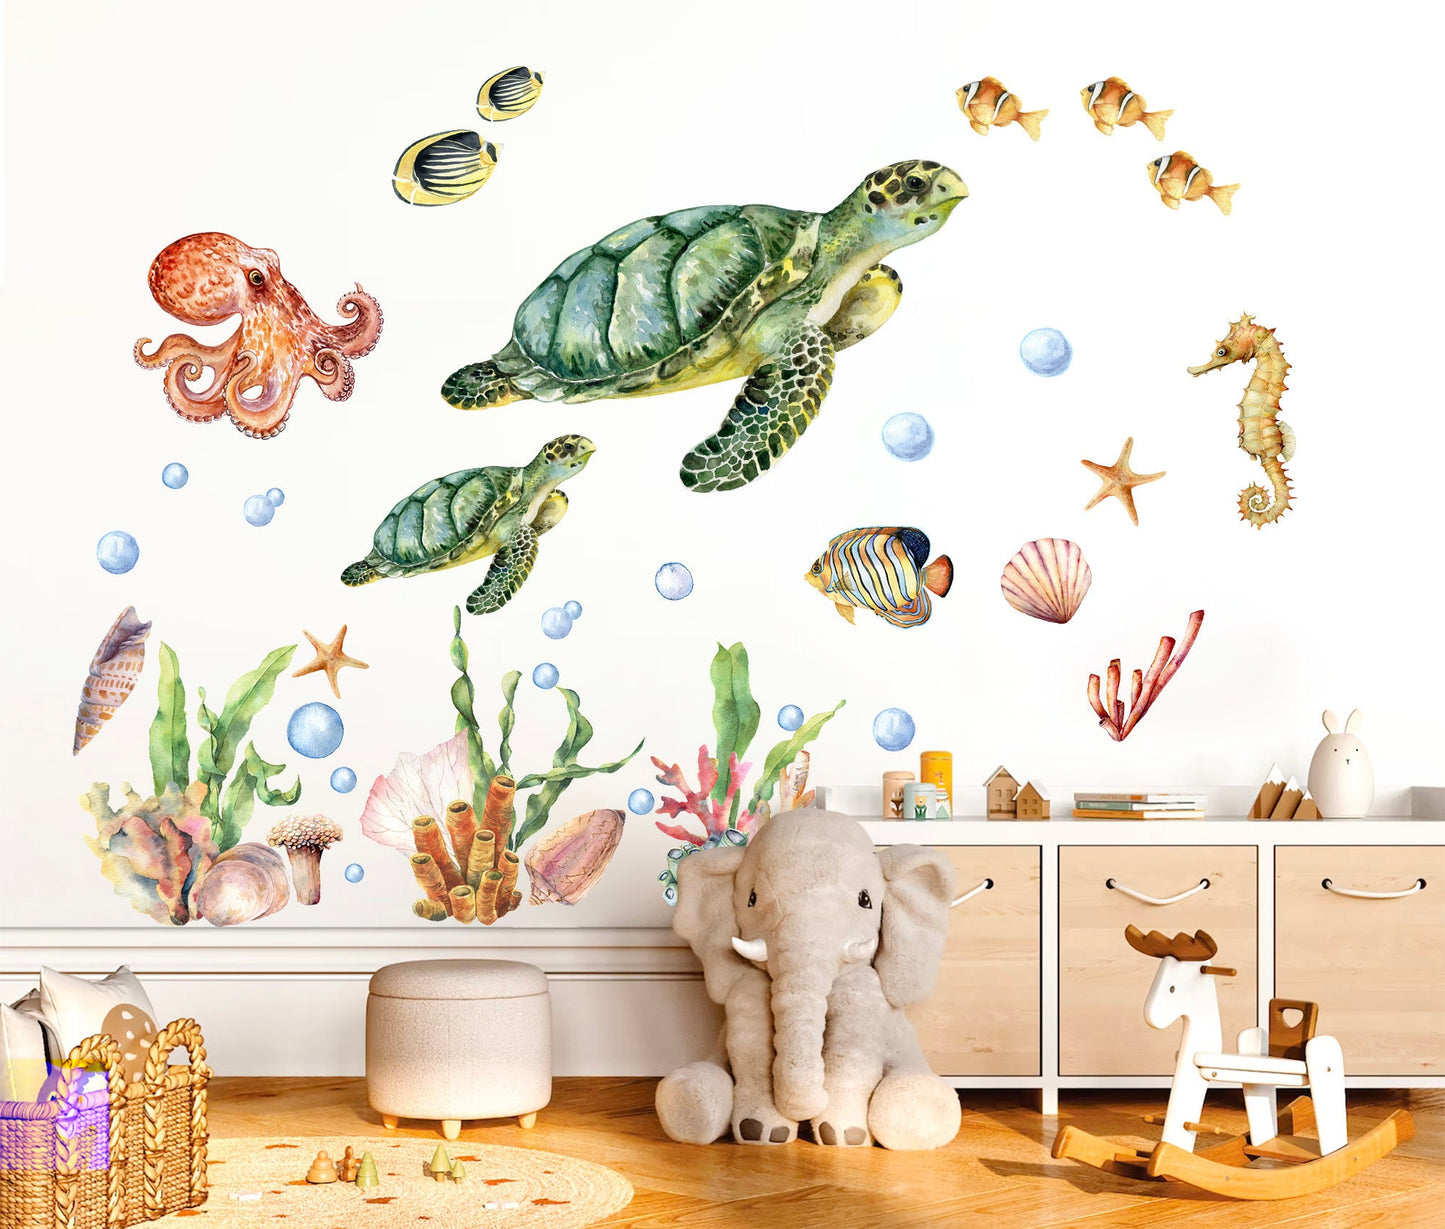 Underwater Adventure Wall Decal - Turtle Mom with Baby Swimming Among Octopus and Seahorse Friends - BR146